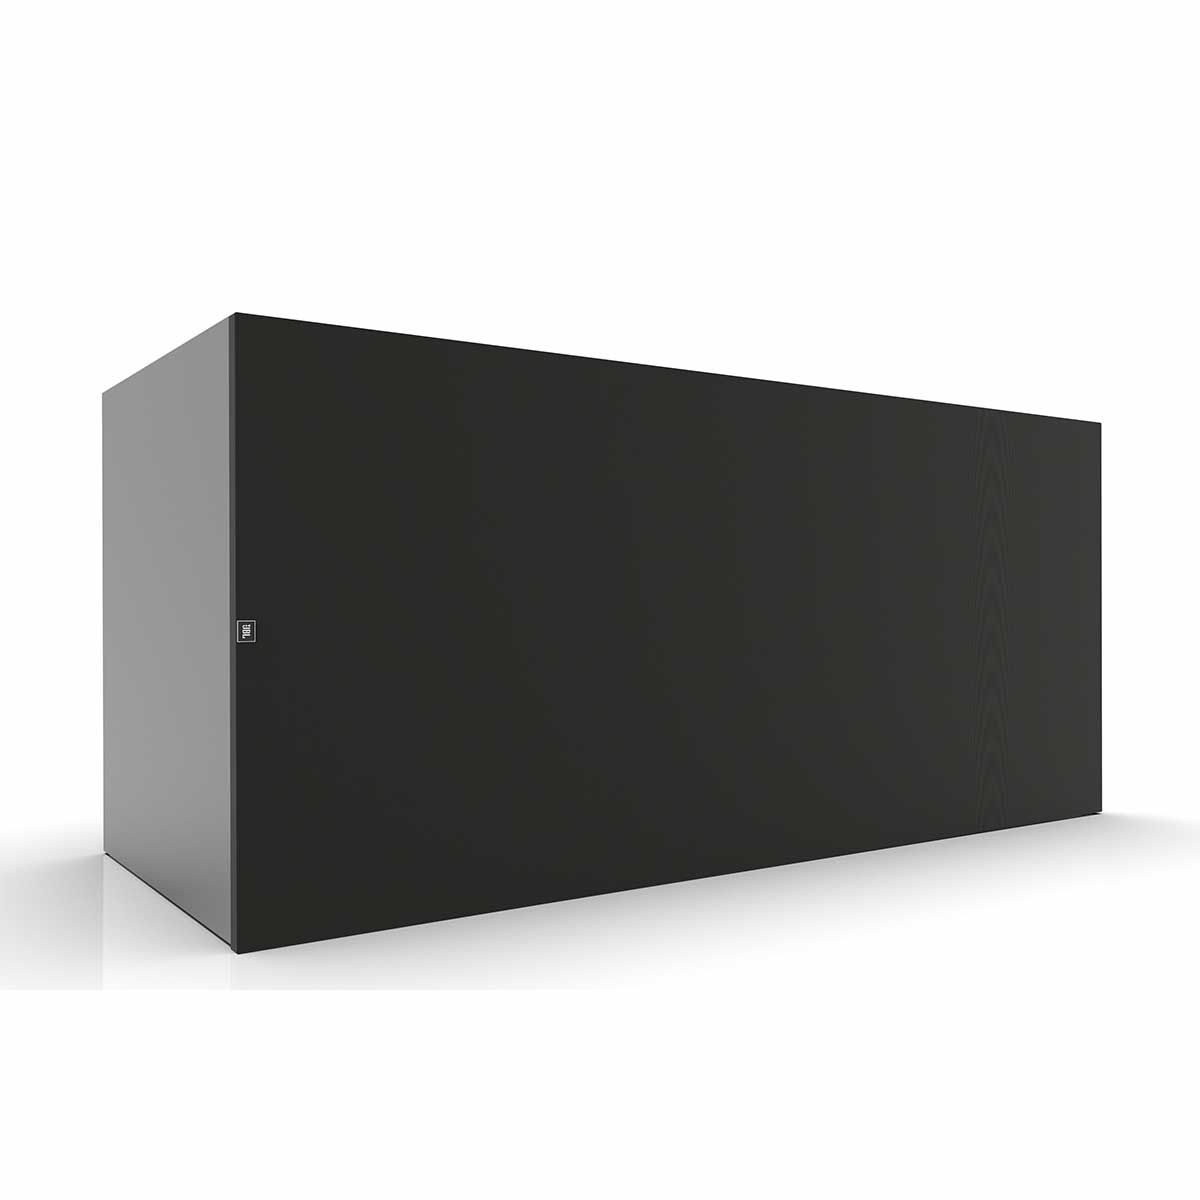 JBL Synthesis SSW-1 Dual Subwoofer, Black, horizontal front right angle with grille